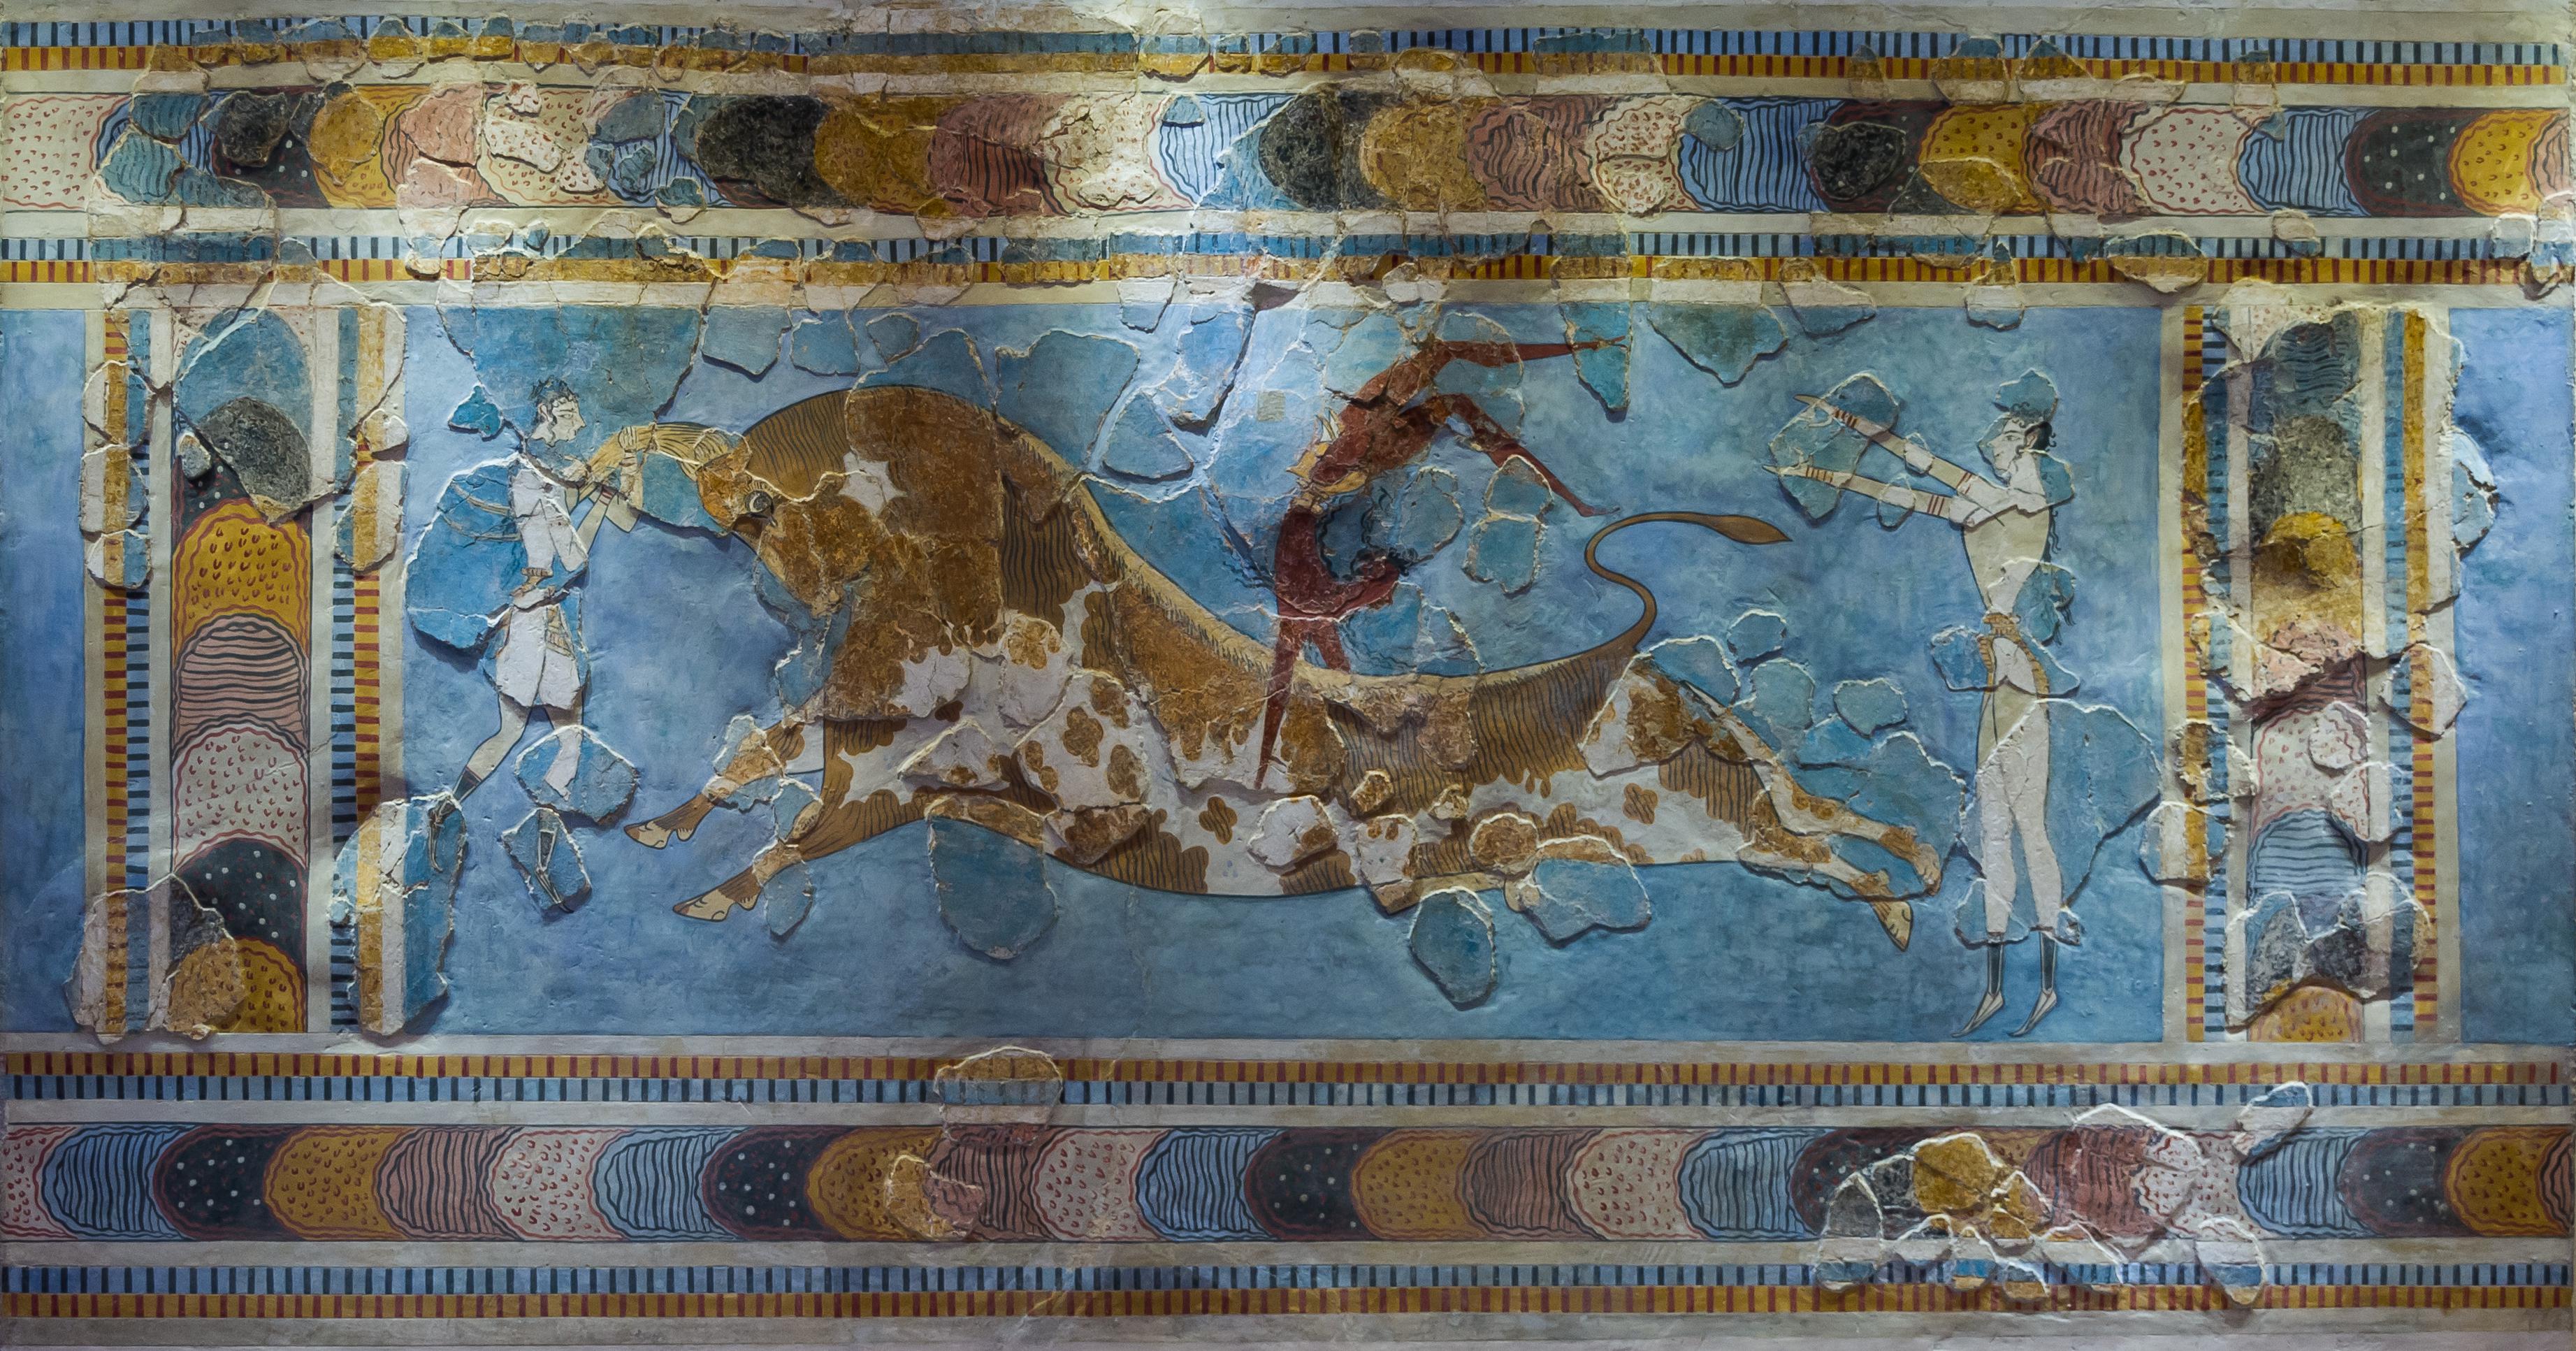 The famous Bull Leaping Fresco at the Minoan palace of Knossos, Crete. Dated 1600 -1450 BCE.jpg